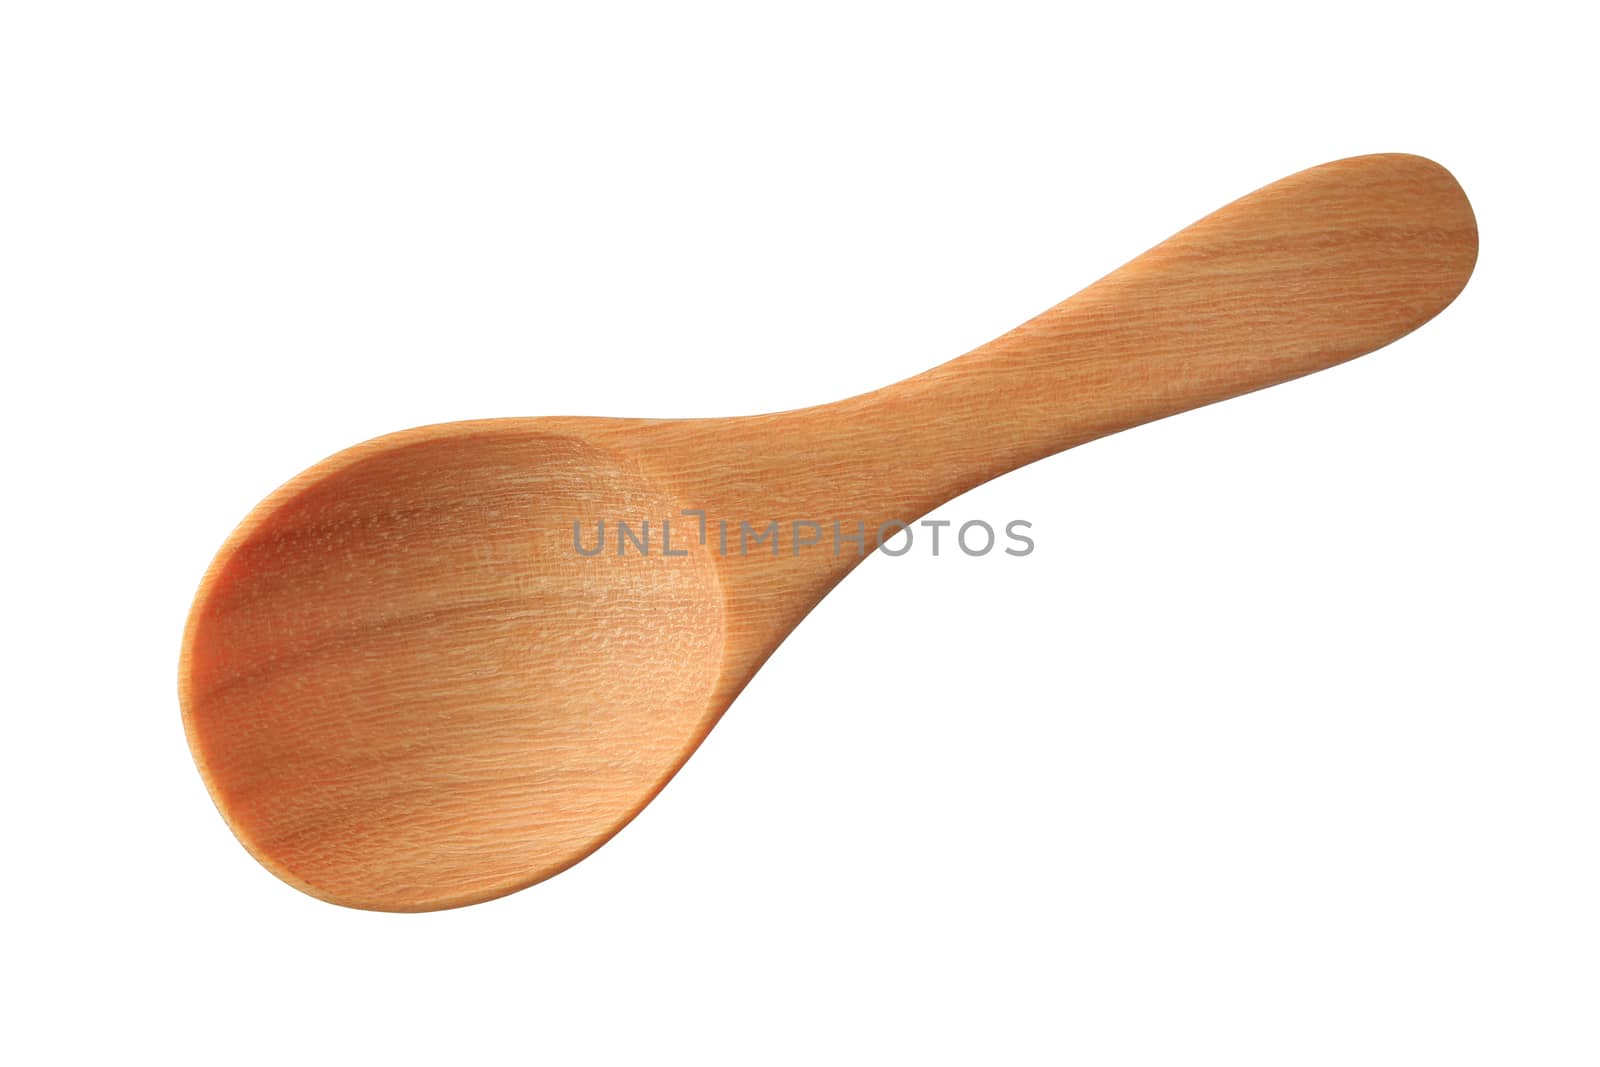 Wooden spoon isolated on a white background by foto76